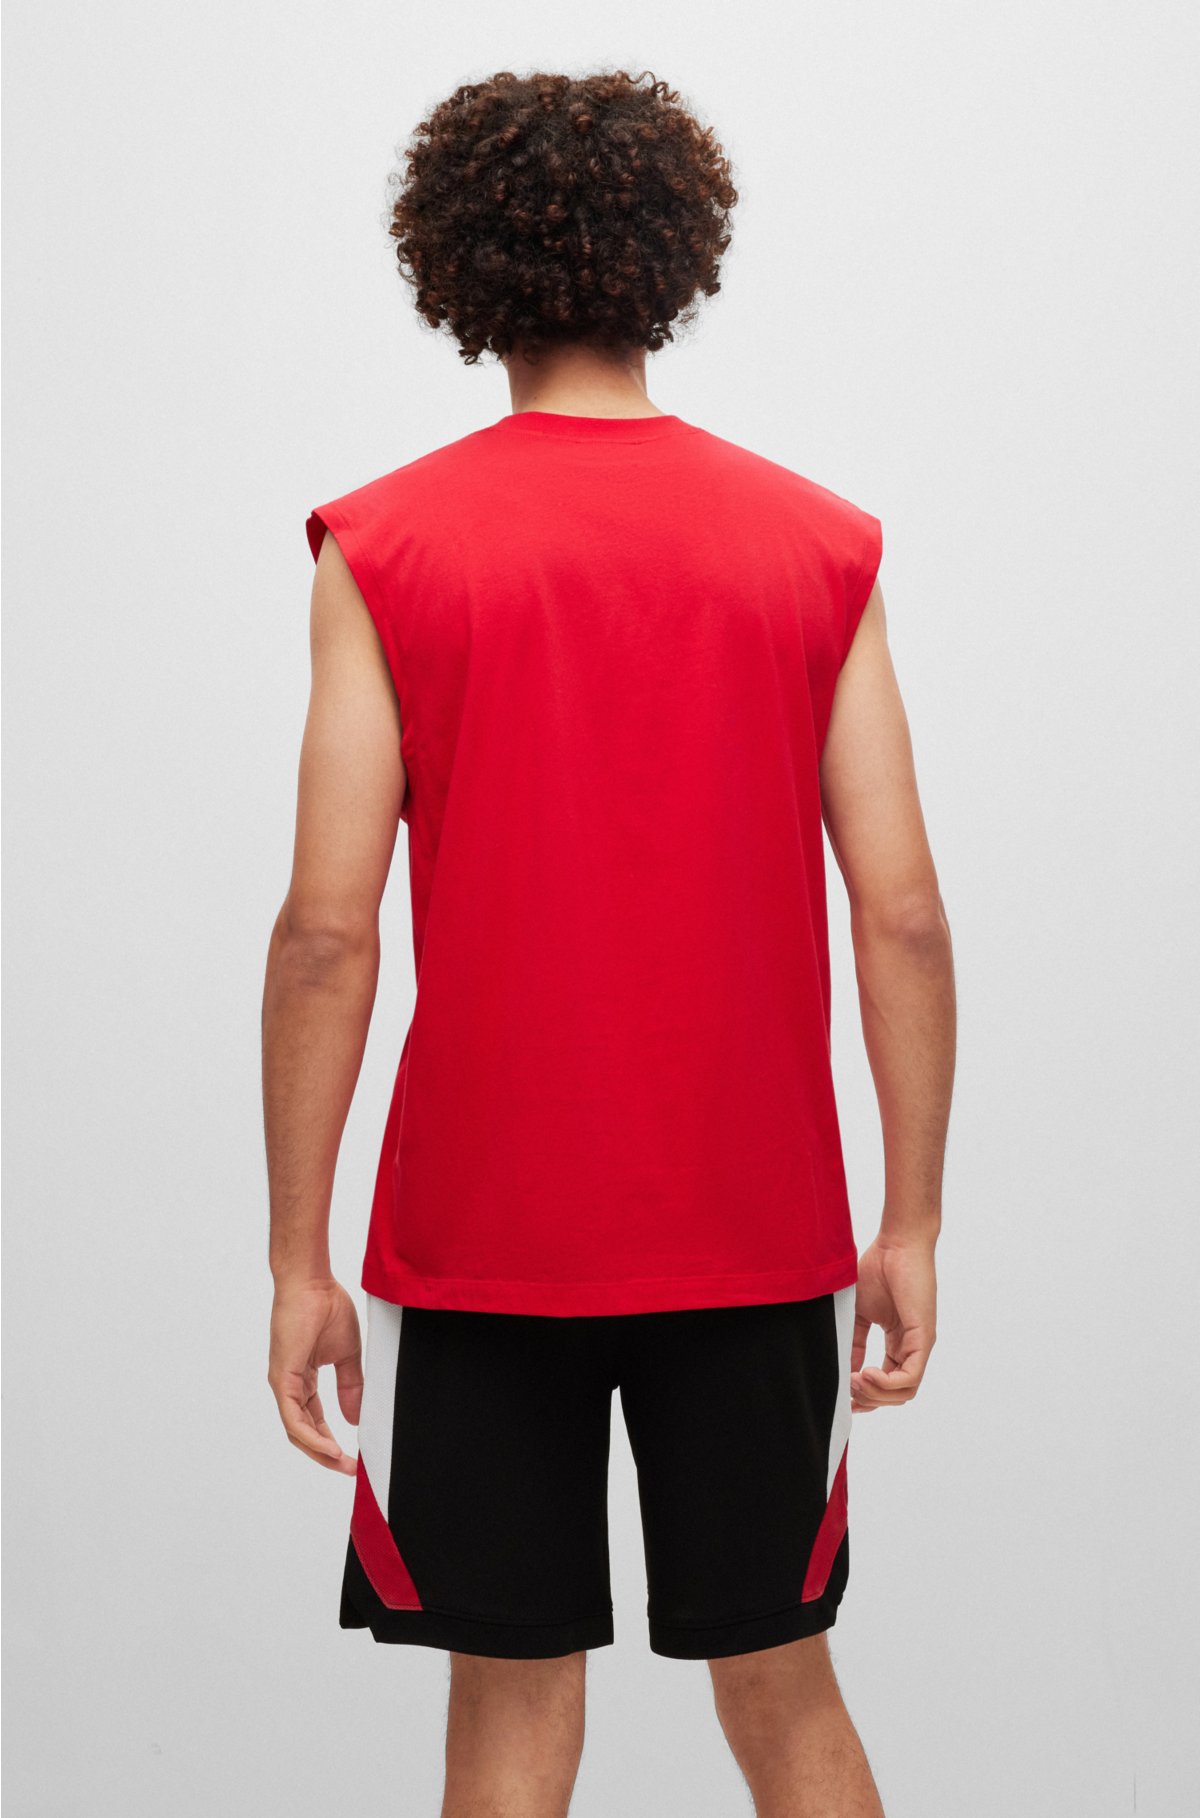 HUGO - Sleeveless T-shirt in cotton jersey with logo label